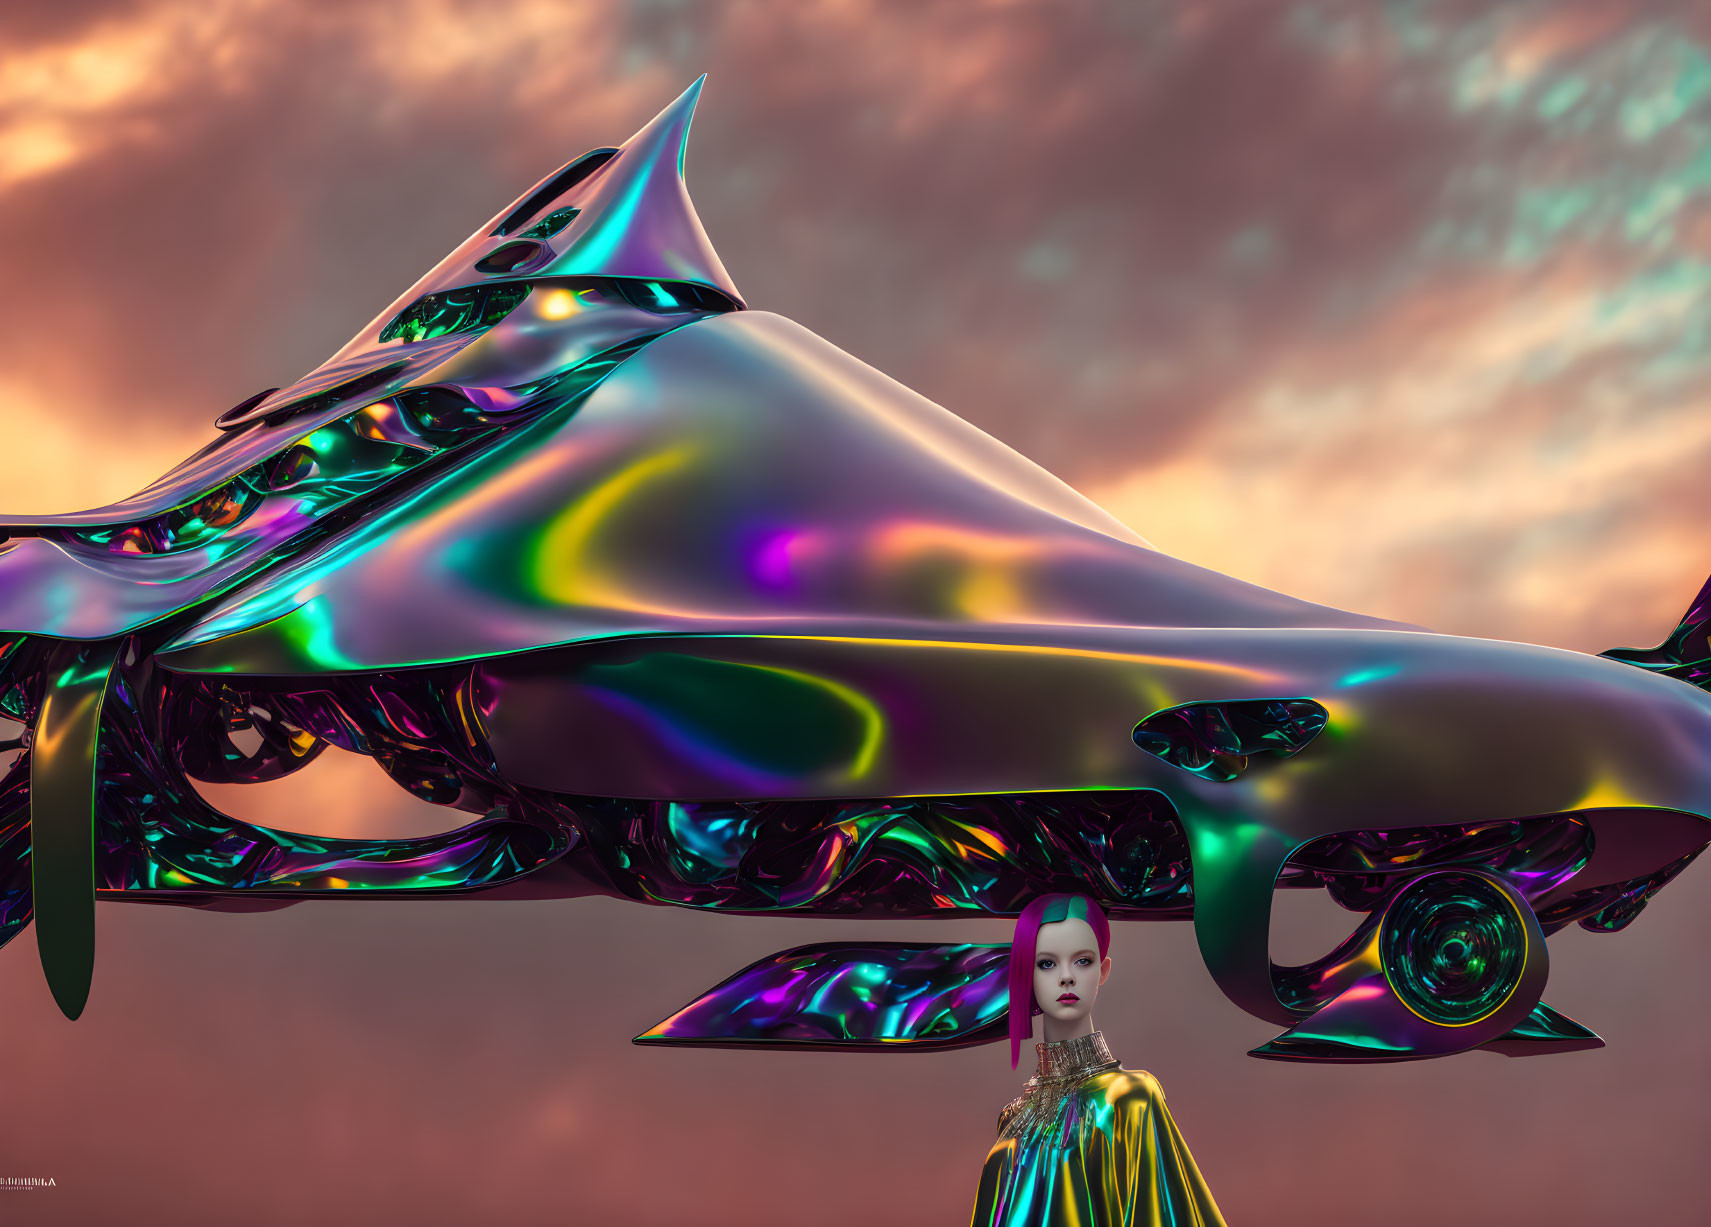 Iridescent futuristic car hovering over woman in golden dress